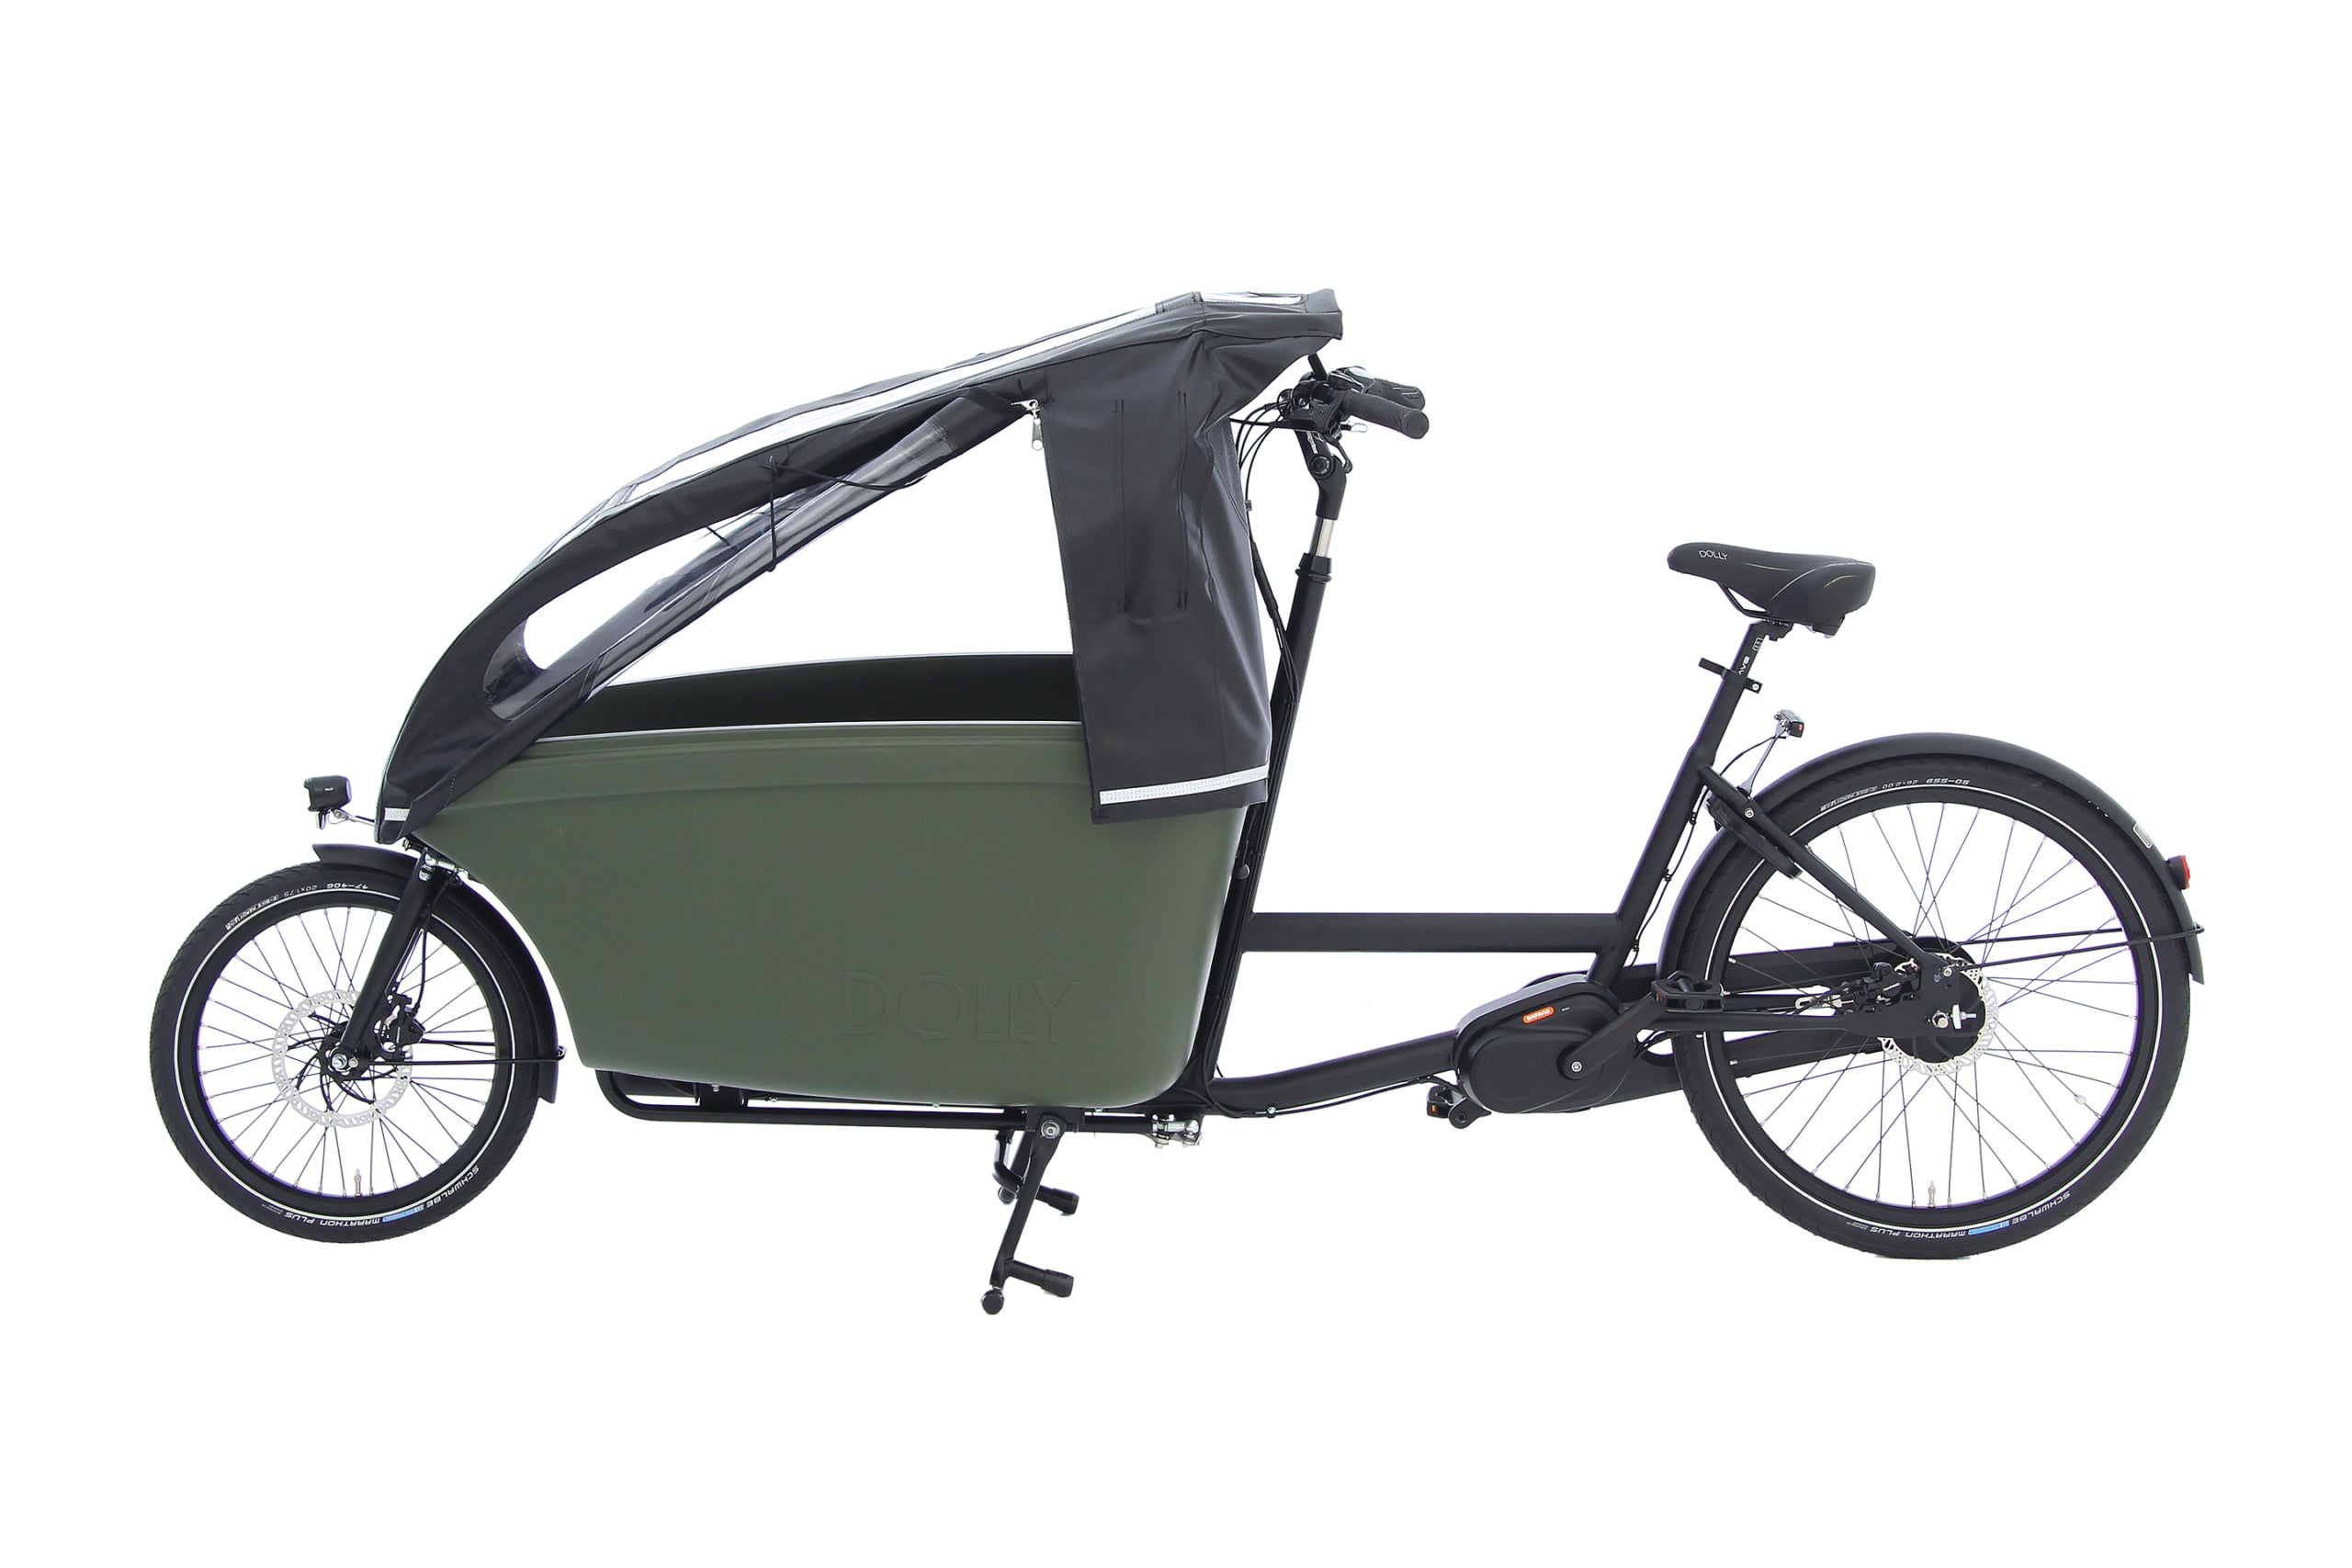 A product image featuring the Dolly electric cargo bike with a rain tent accessory installed. The zippers are open on the tent in this photo with the sides rolled up to allow extra ventilation.